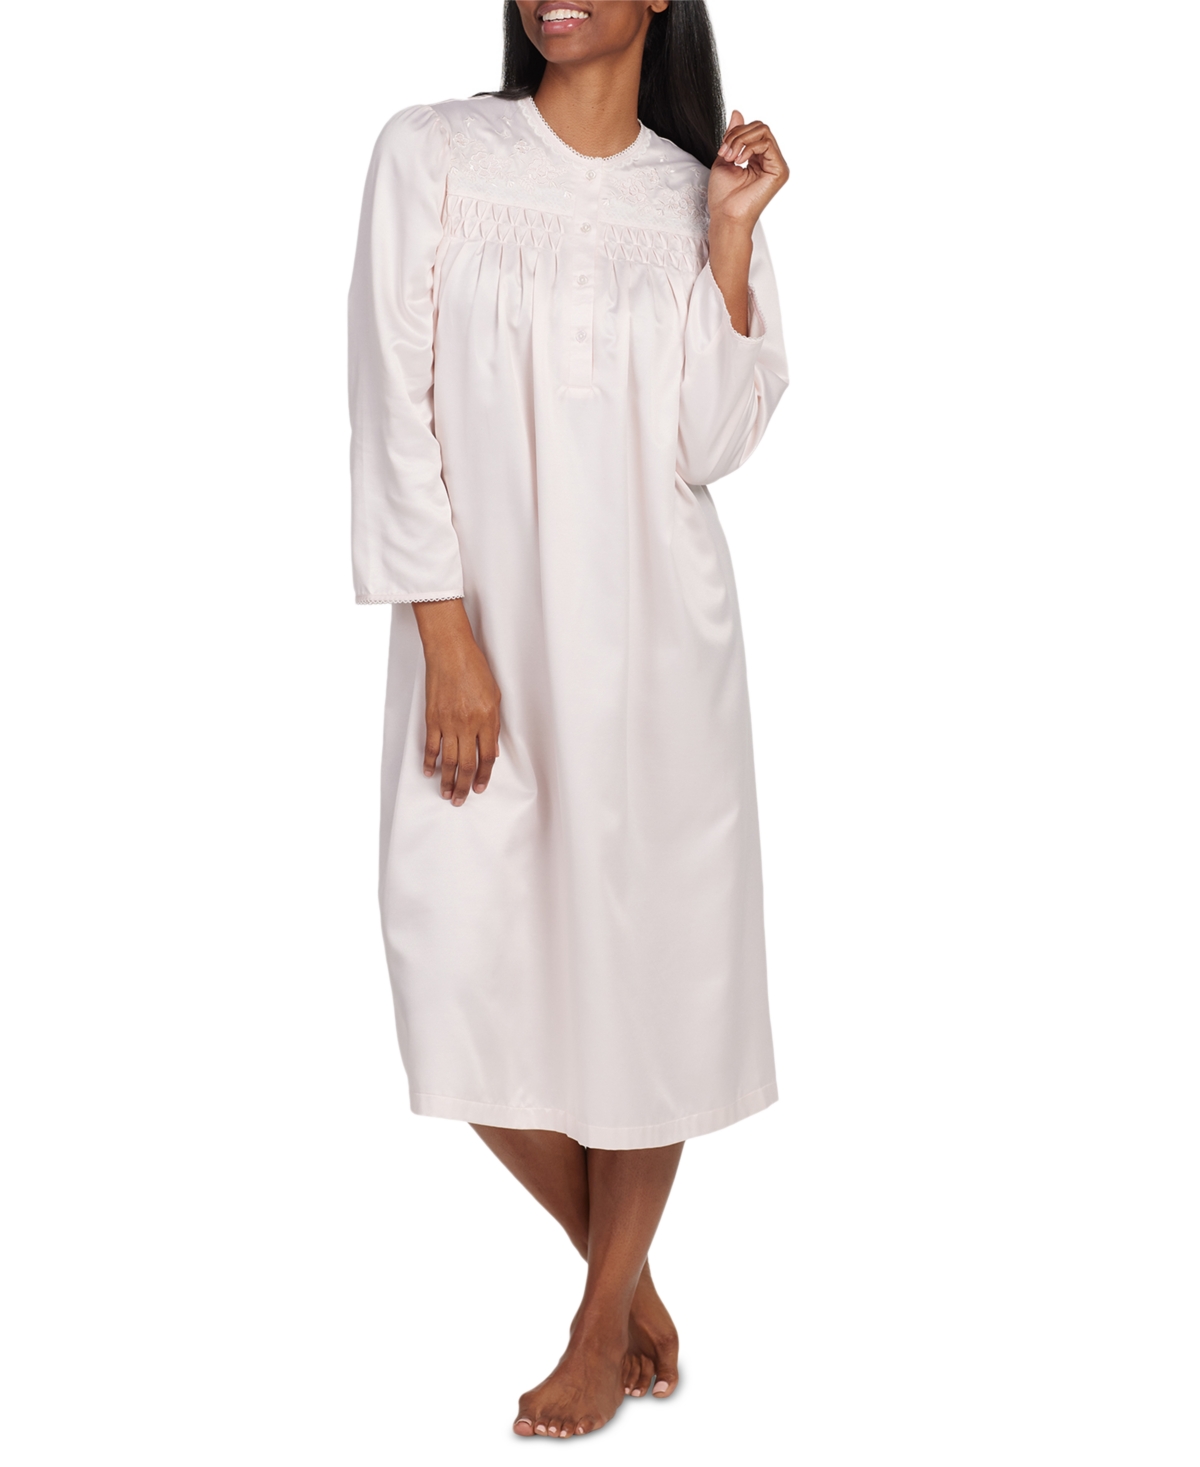 Women's Embroidered Button-Front Nightgown - Peach